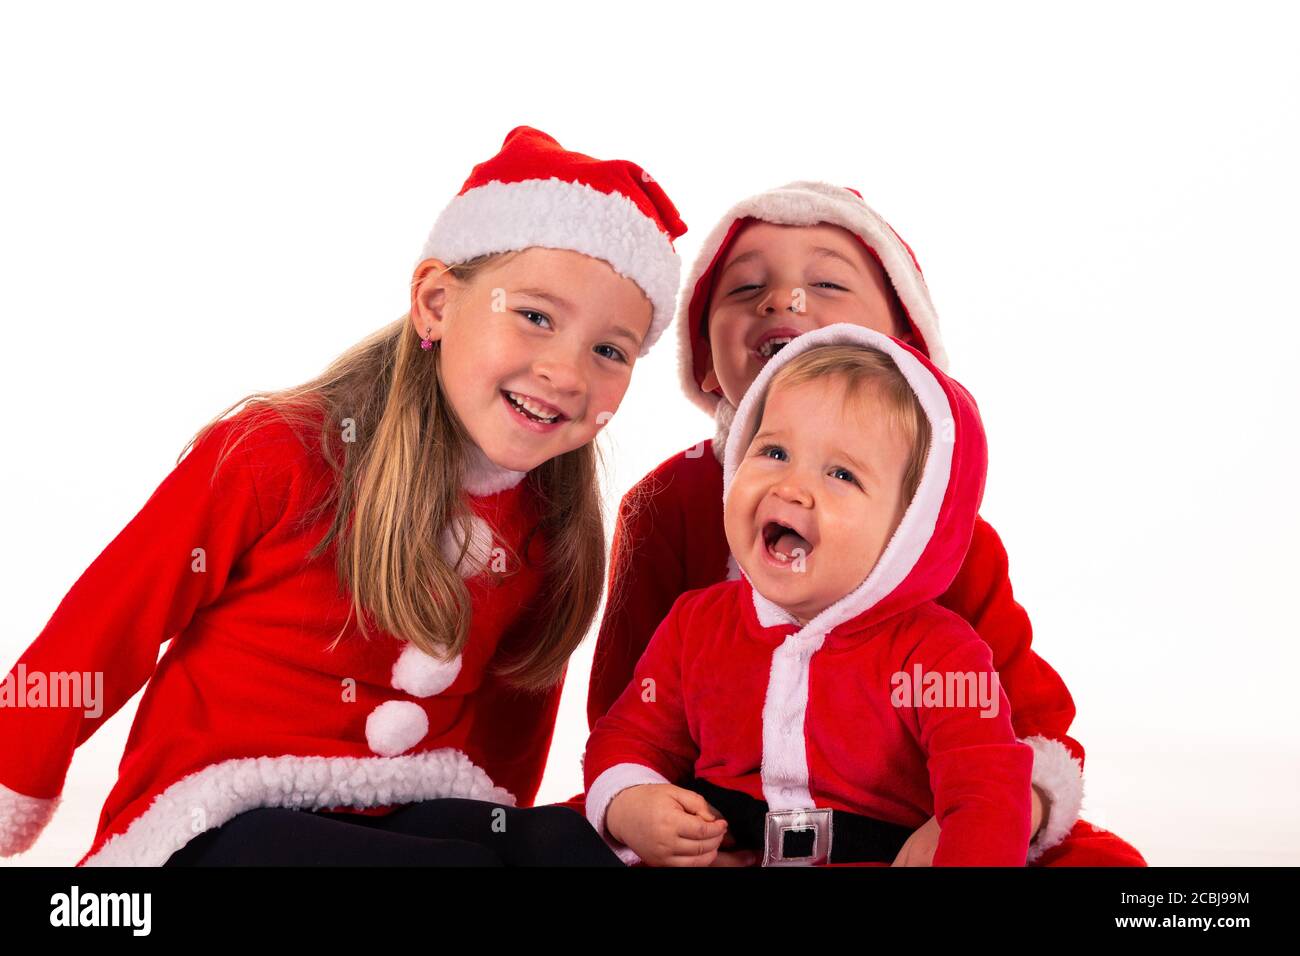 3 children, 2 boys (1 year old - 4 year old) 1 girl (6 years old) sitting together on the floor in Santa Claus costume laughing. isolated on white Stock Photo